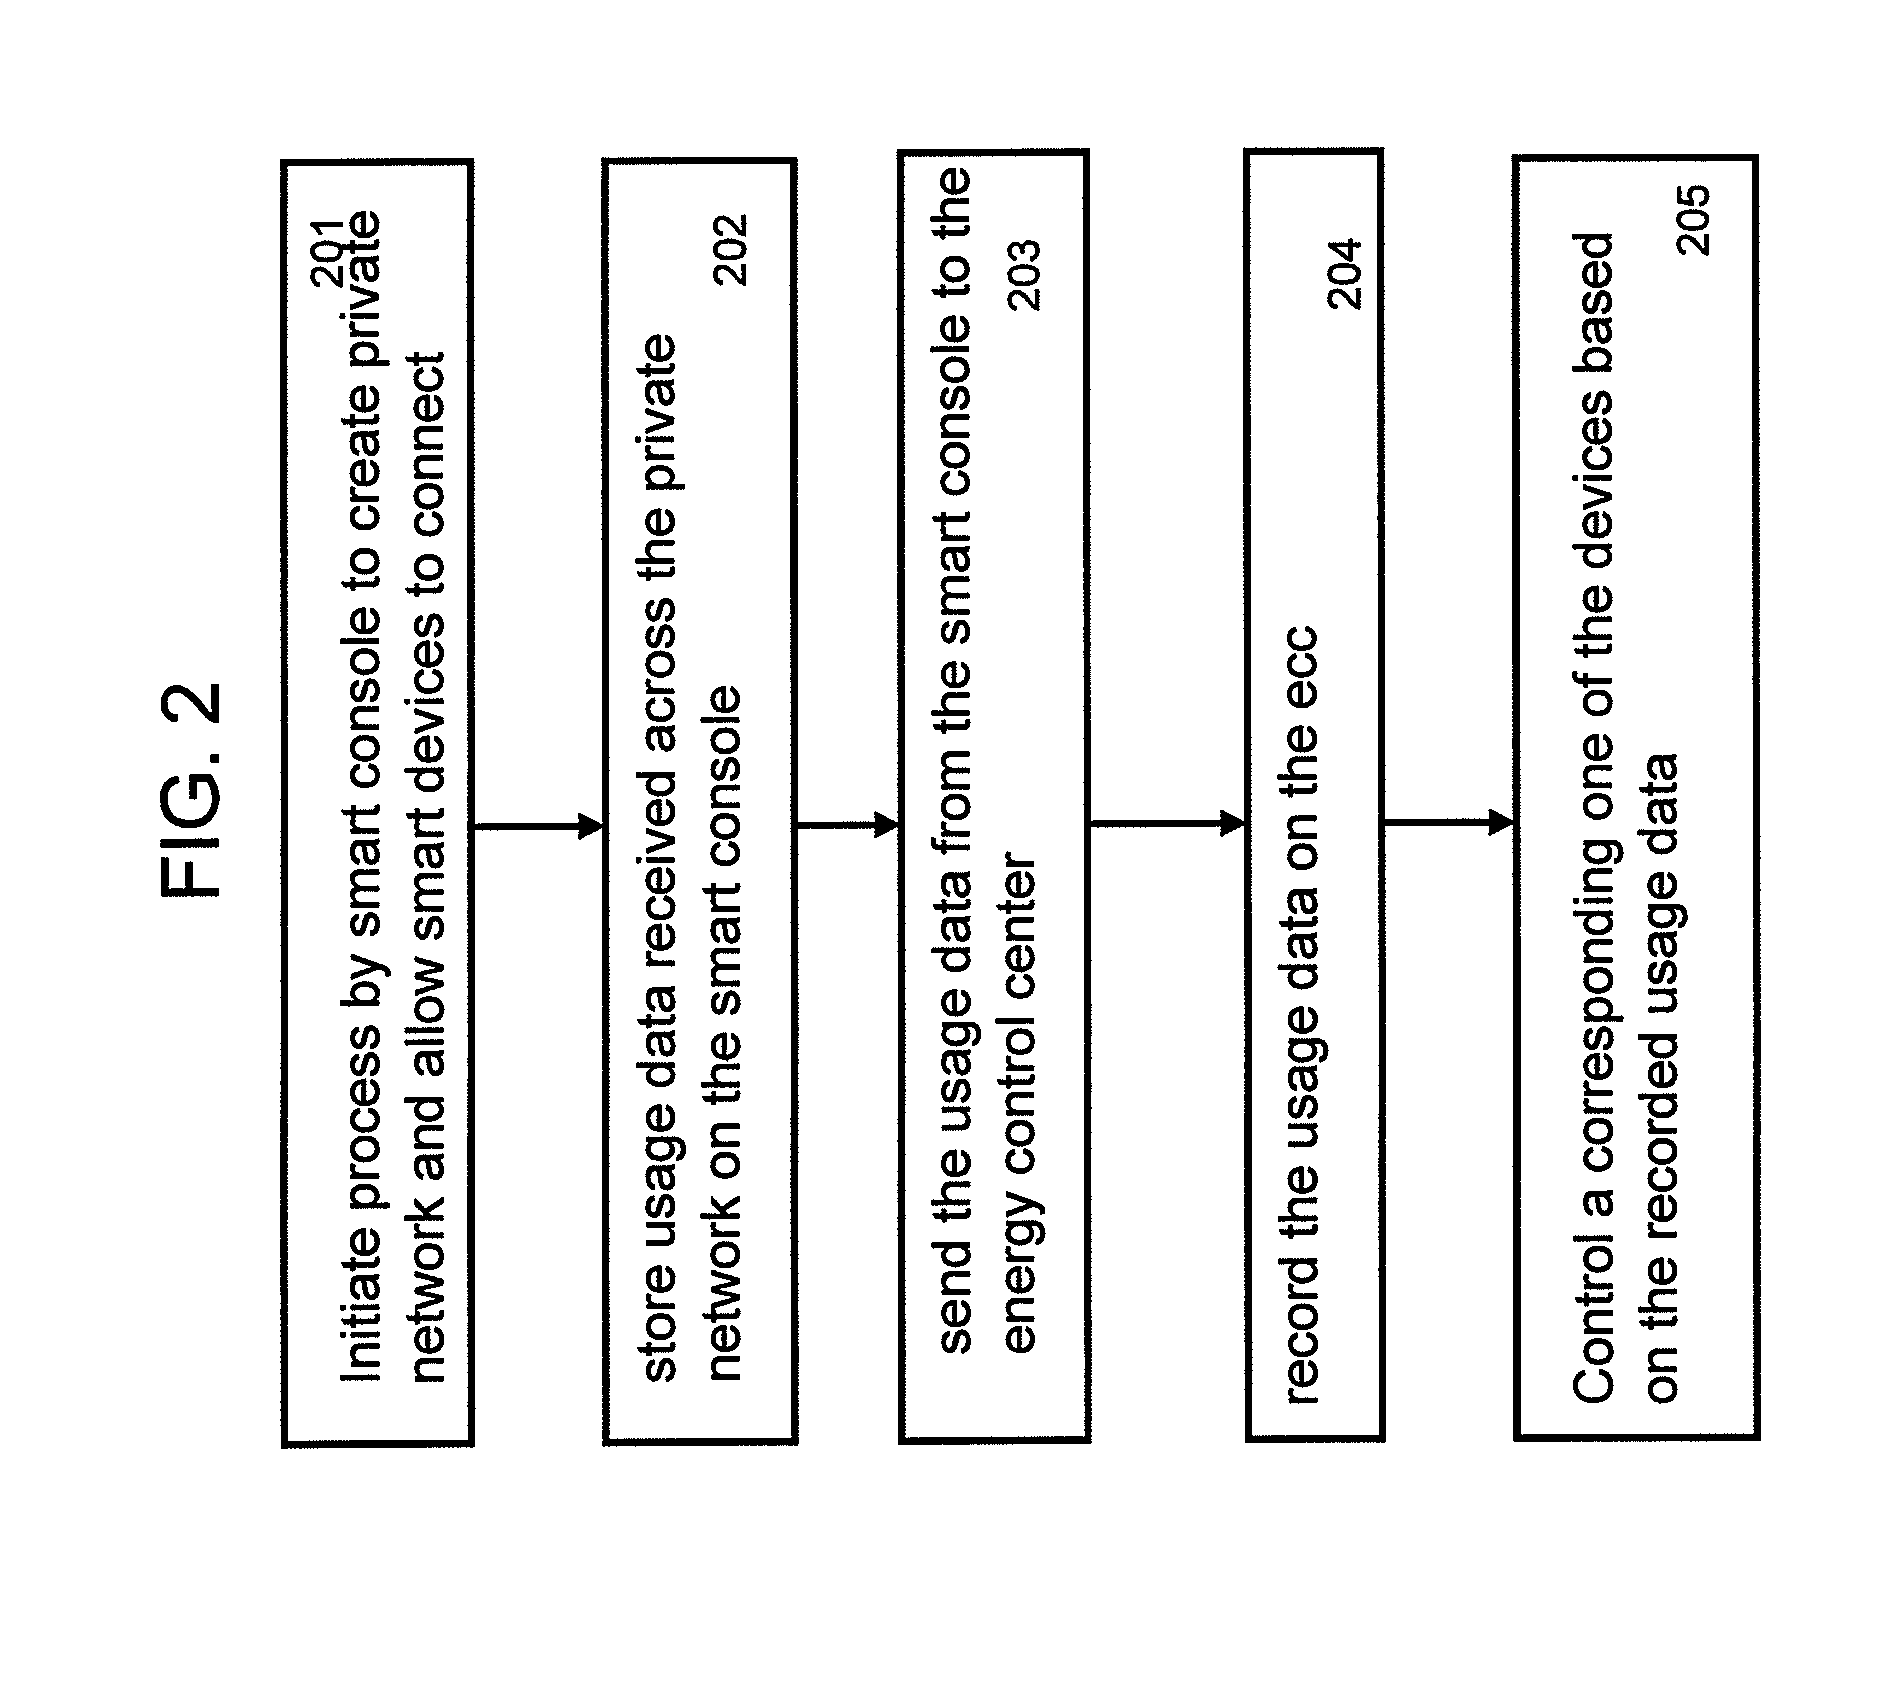 Method and system to monitor and control energy